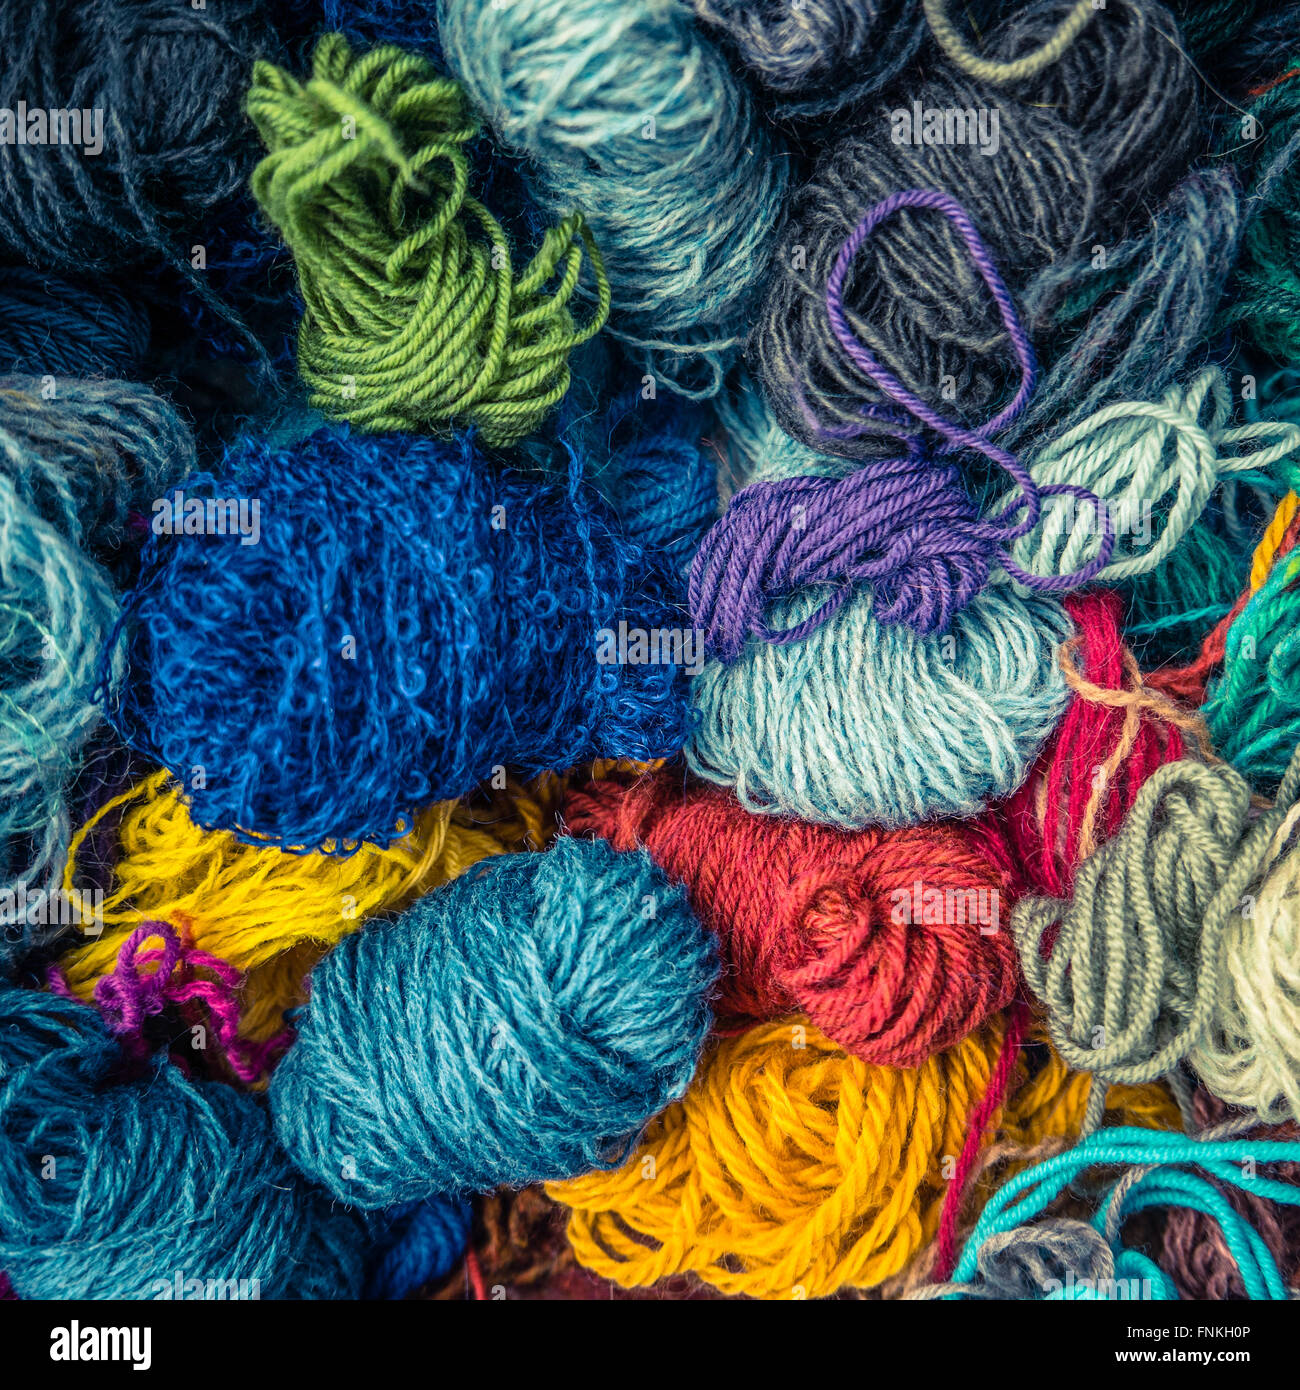 Texture Of Different Types Of Balls Of  Wool Stock Photo